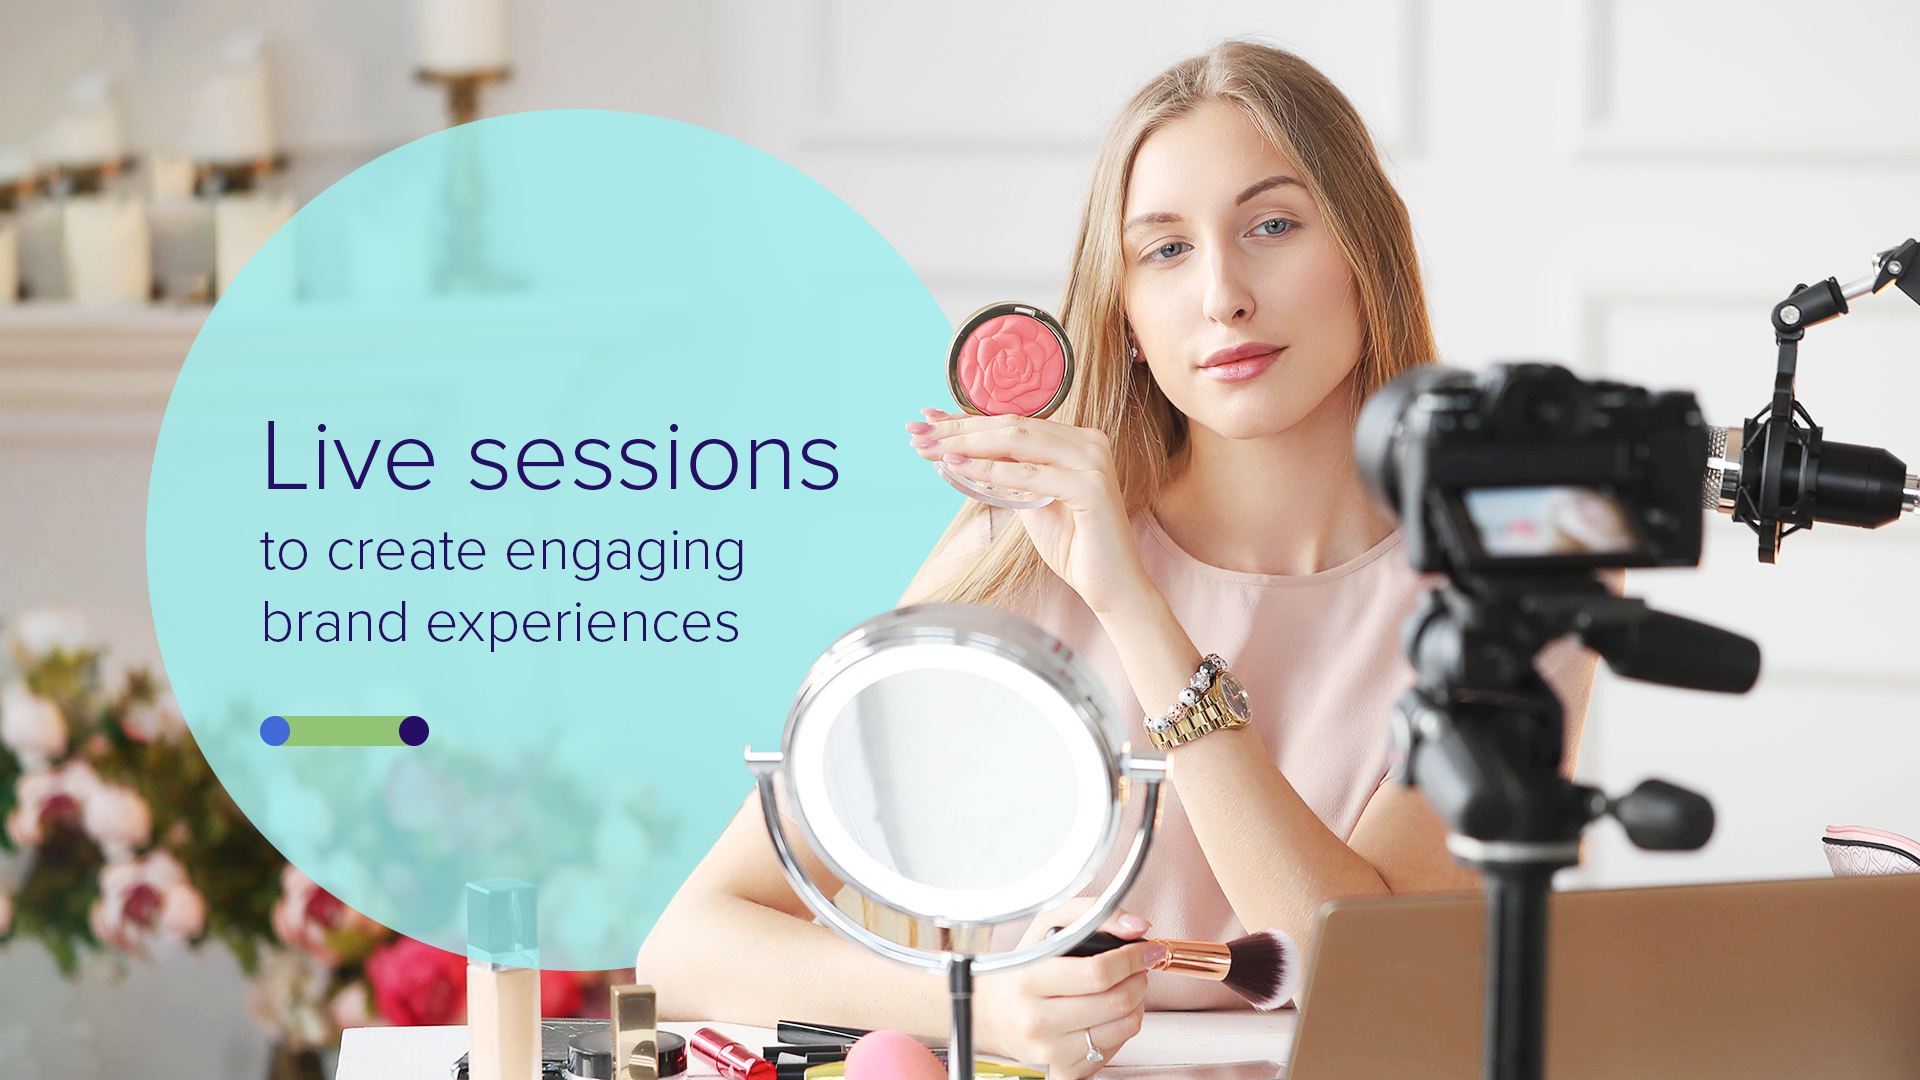 Live sessions with beauty advisors